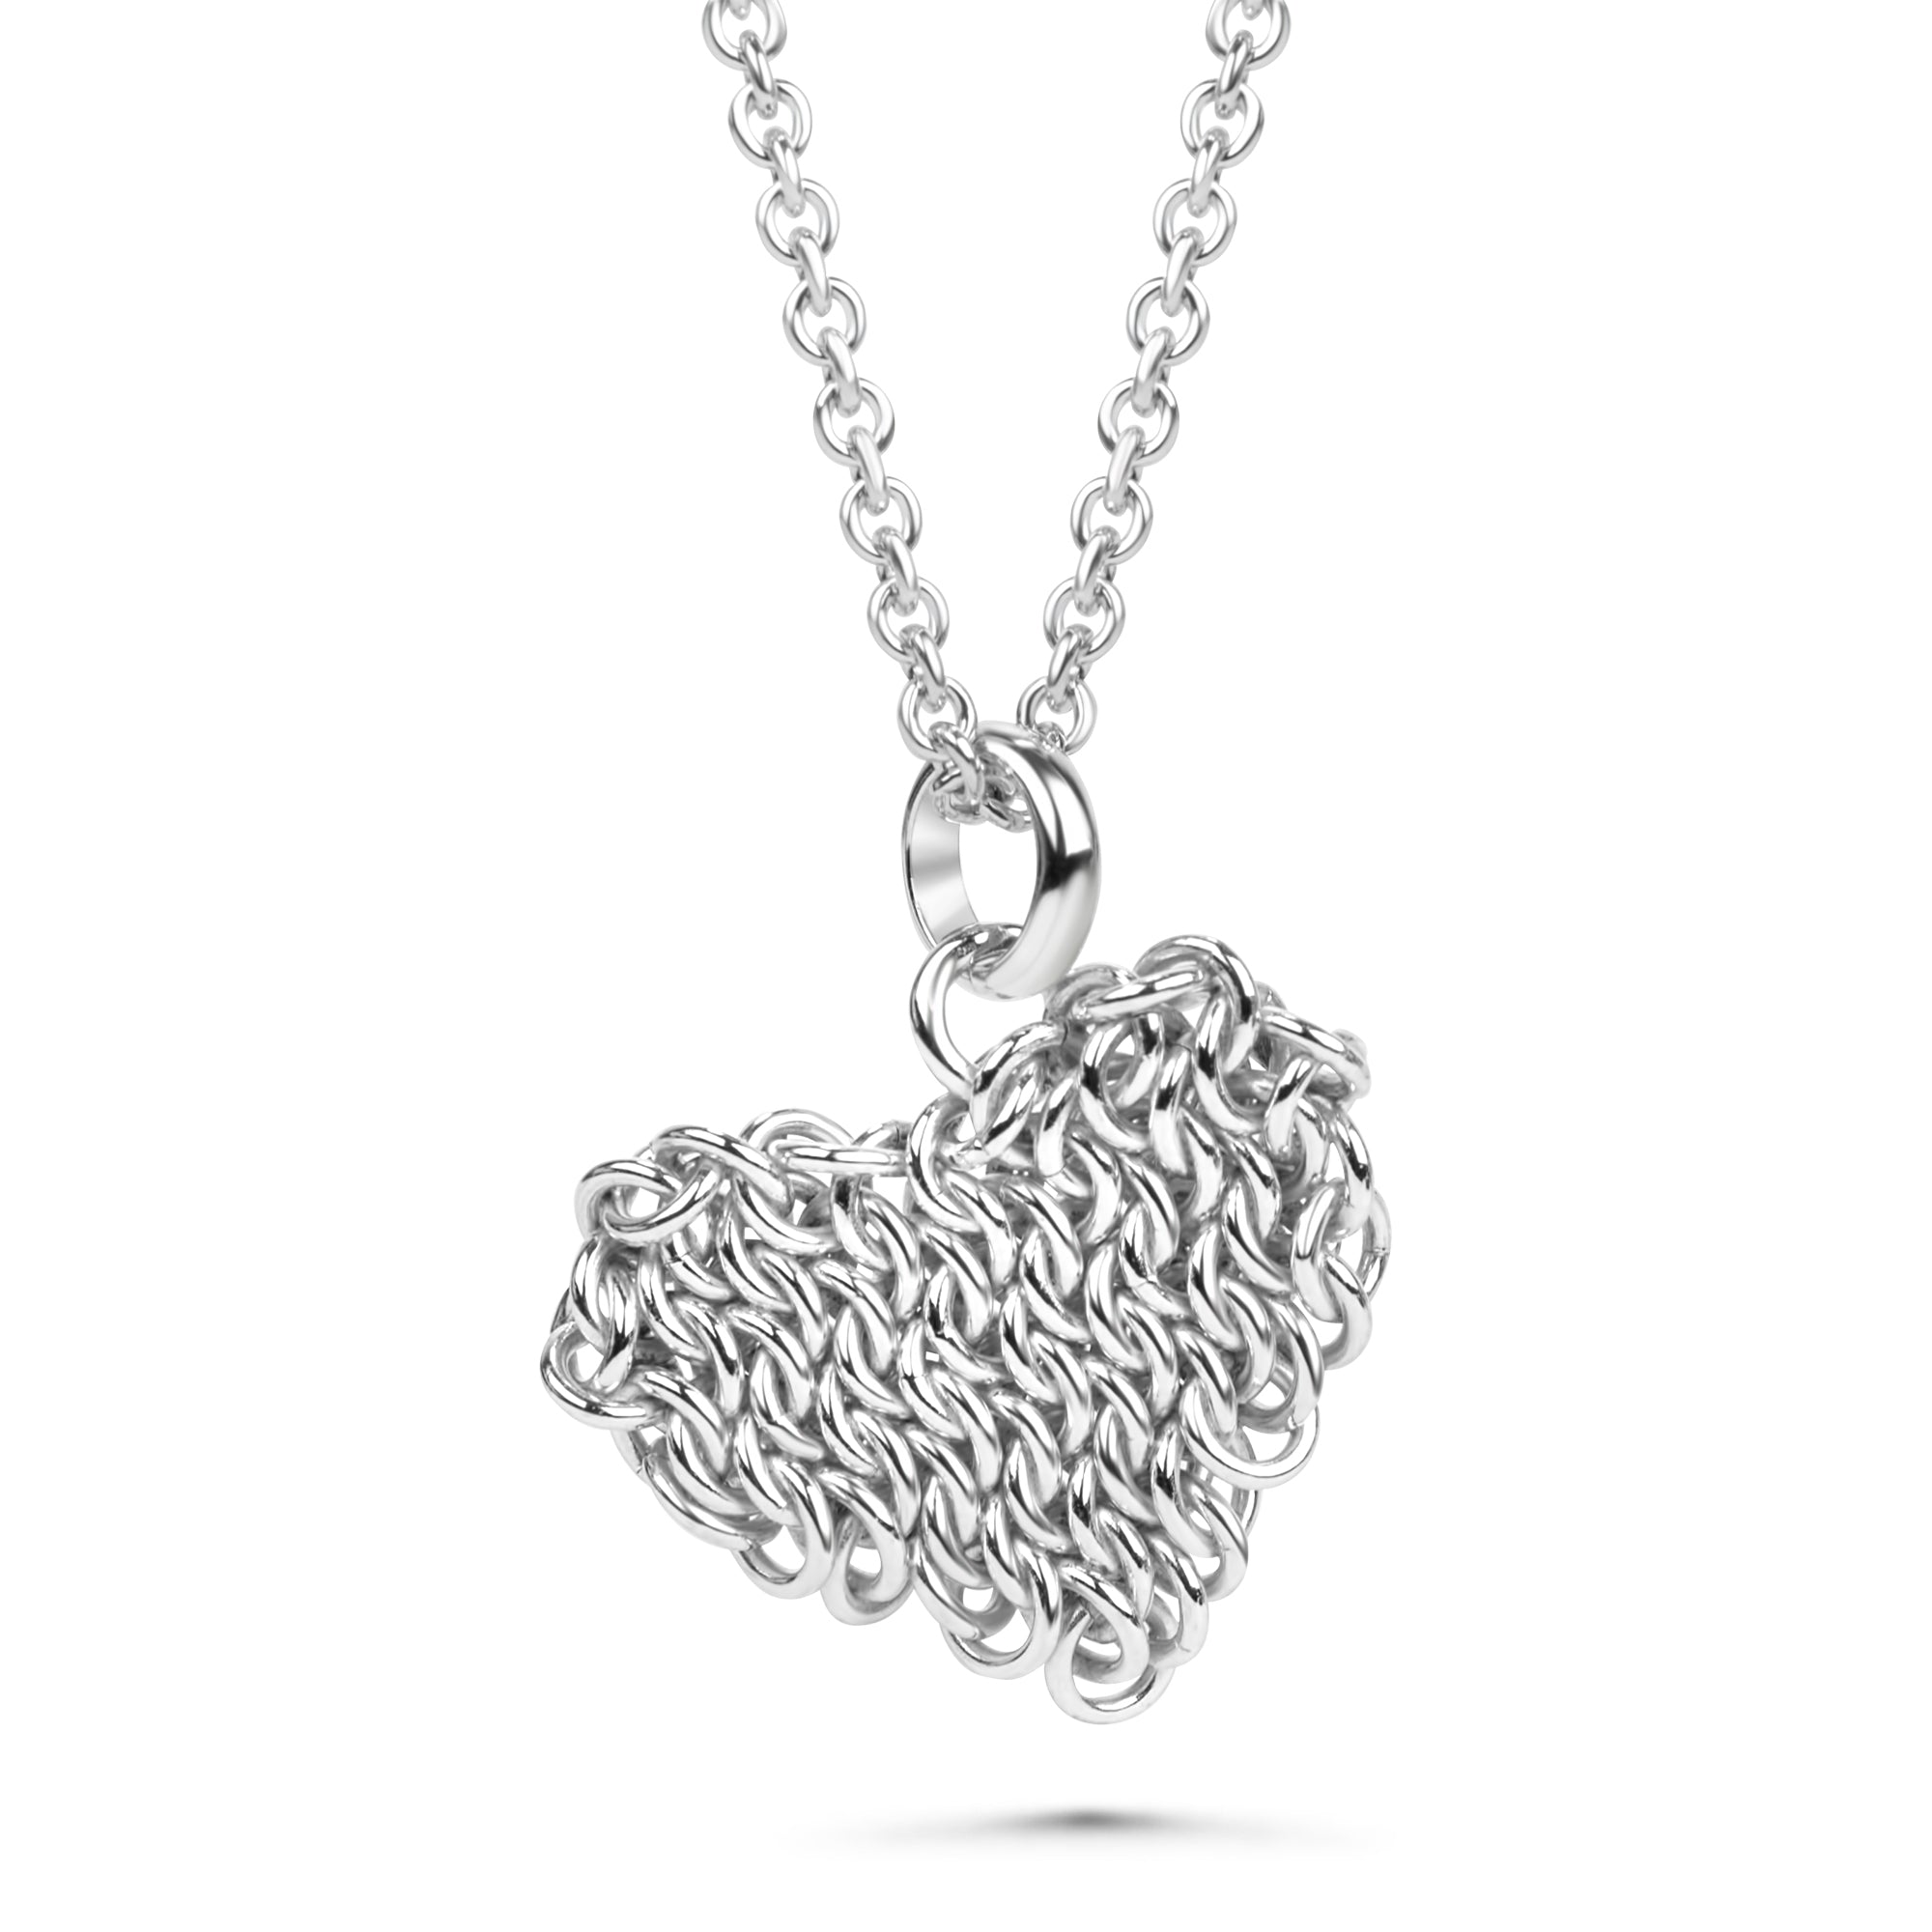 Fused Chainmaille Heart Pendant Necklace, Small